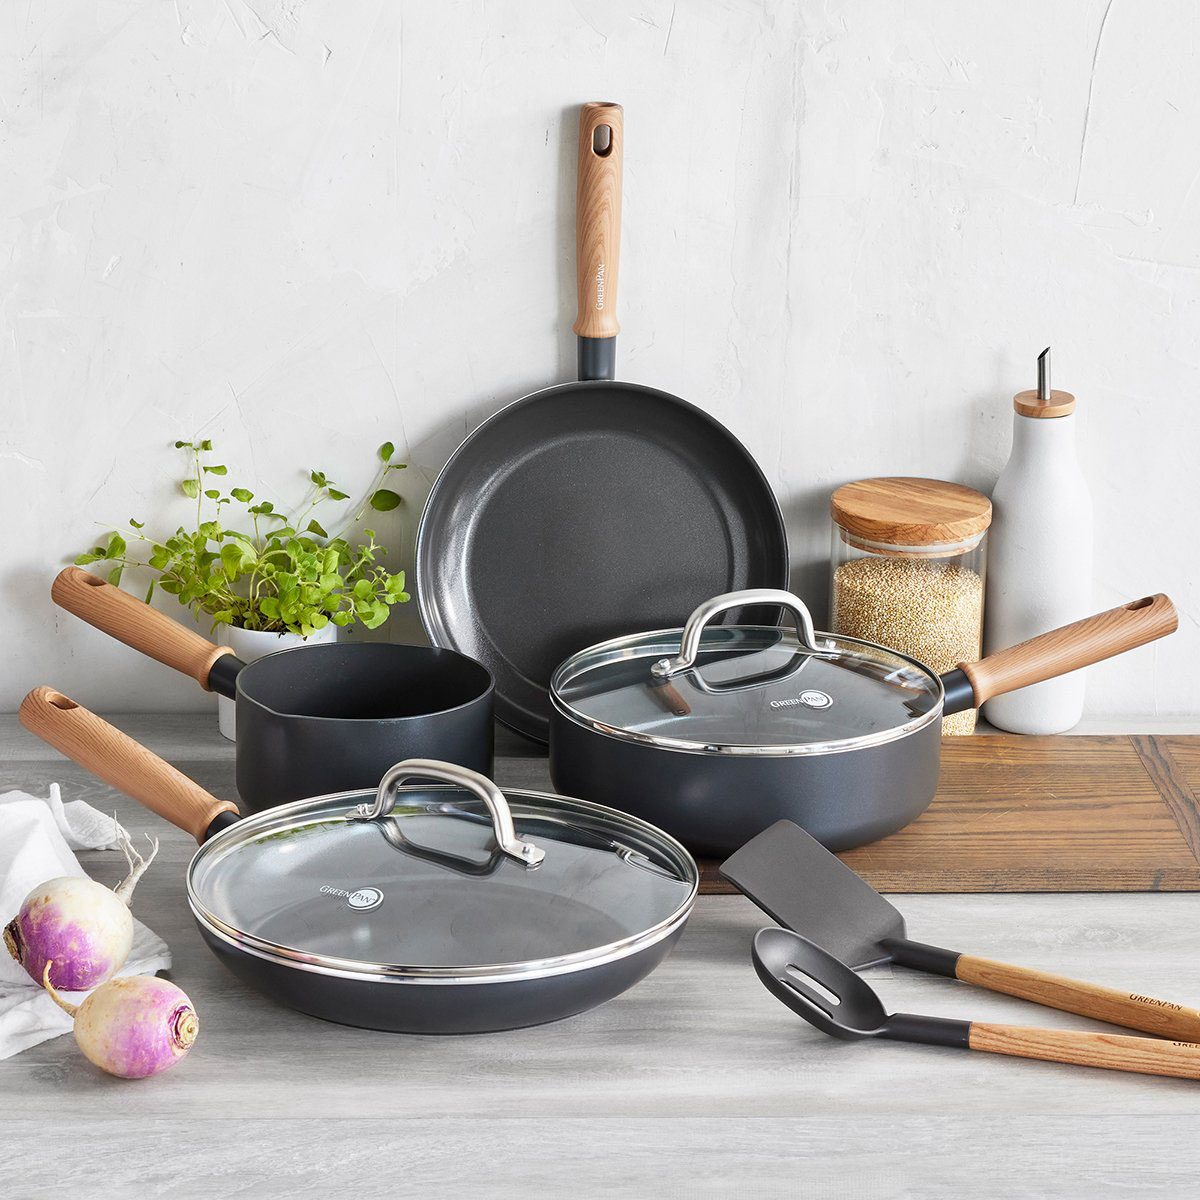 GreenPan cookware sale: Save 30% on pots and pans at this Labor Day sale -  Reviewed